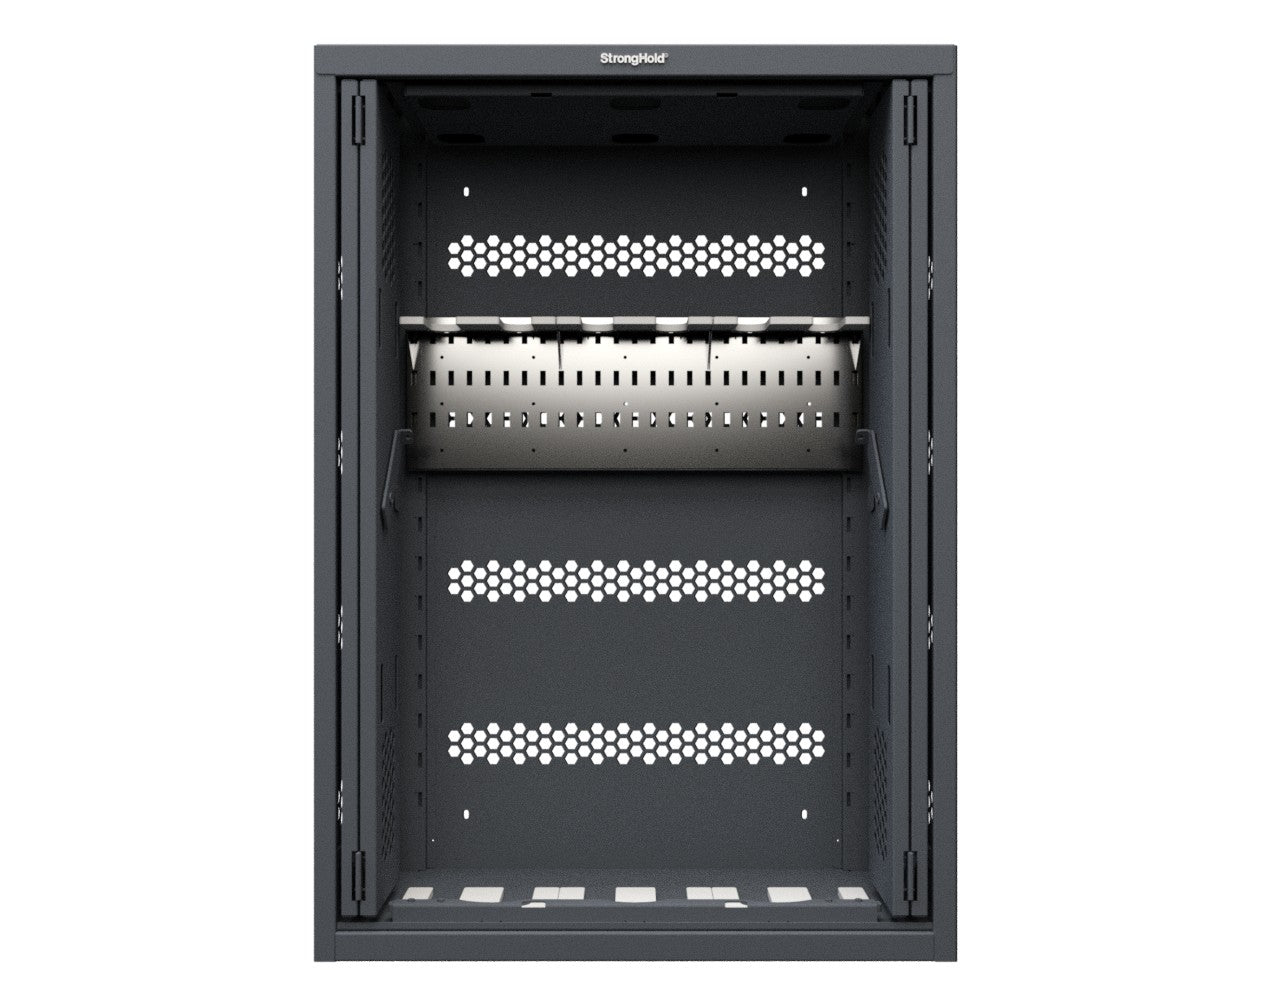 Modular Weapons Storage M240/M249 Cabinet with Recessed Doors - 42 in. W x 16 1/2 in. D x 60 in. H